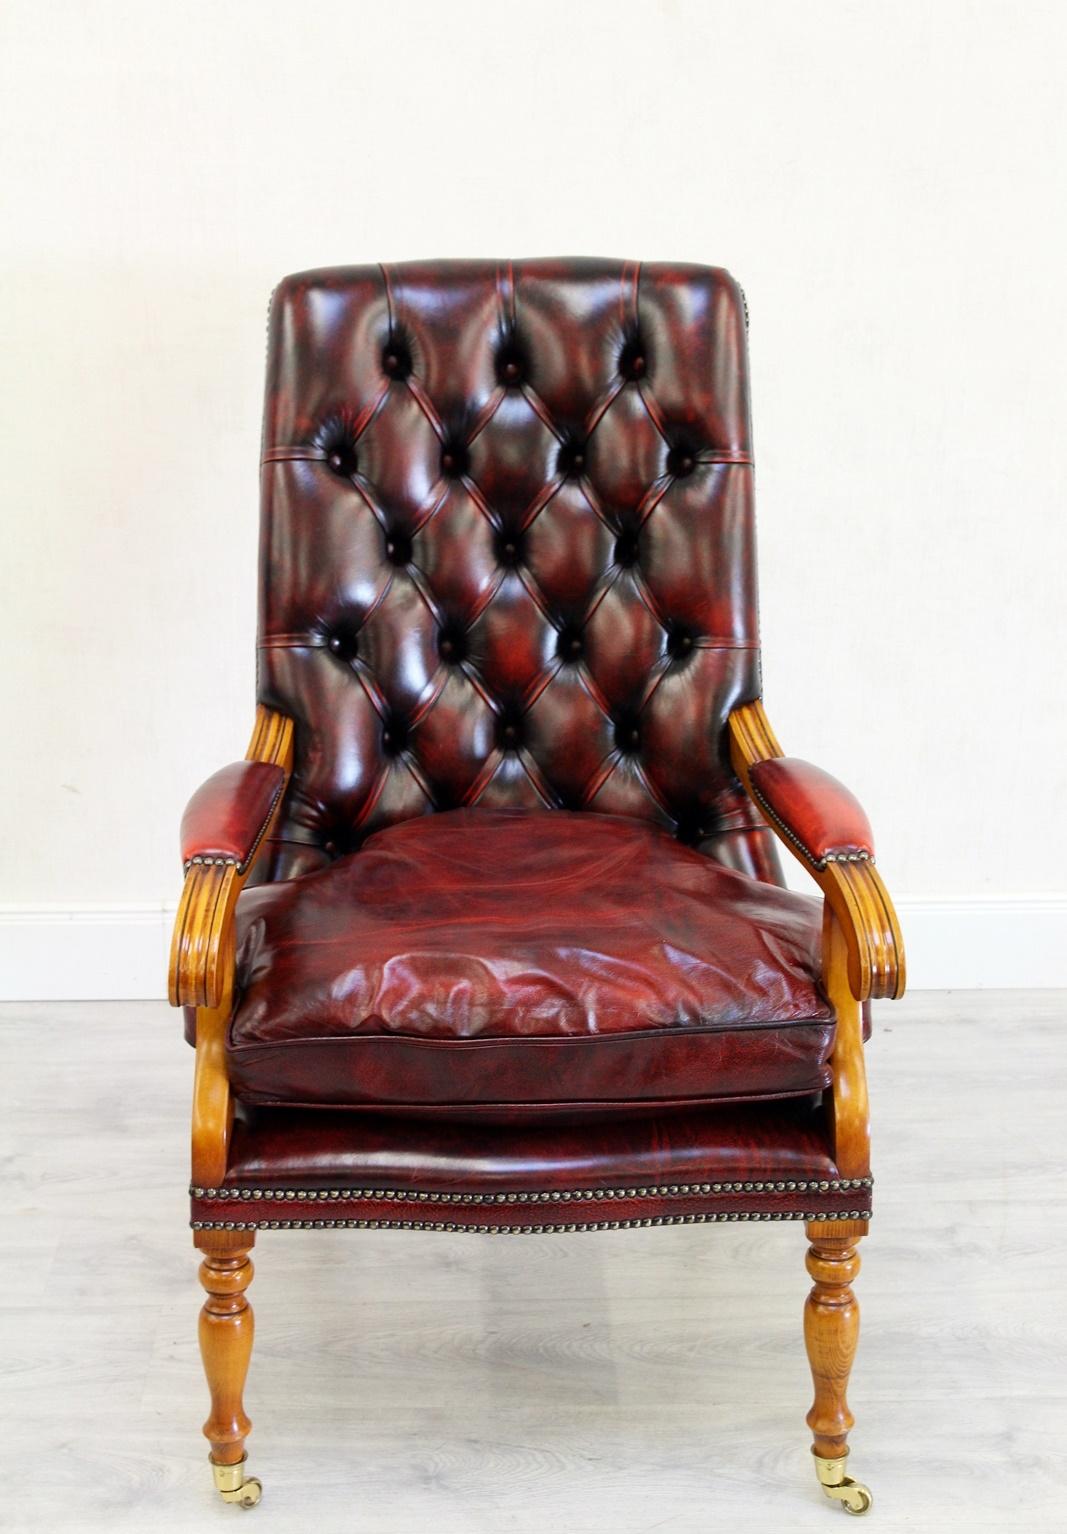 Old office armchair from England

Condition: The chair is in a very good condition for its age and still has the charm of the 